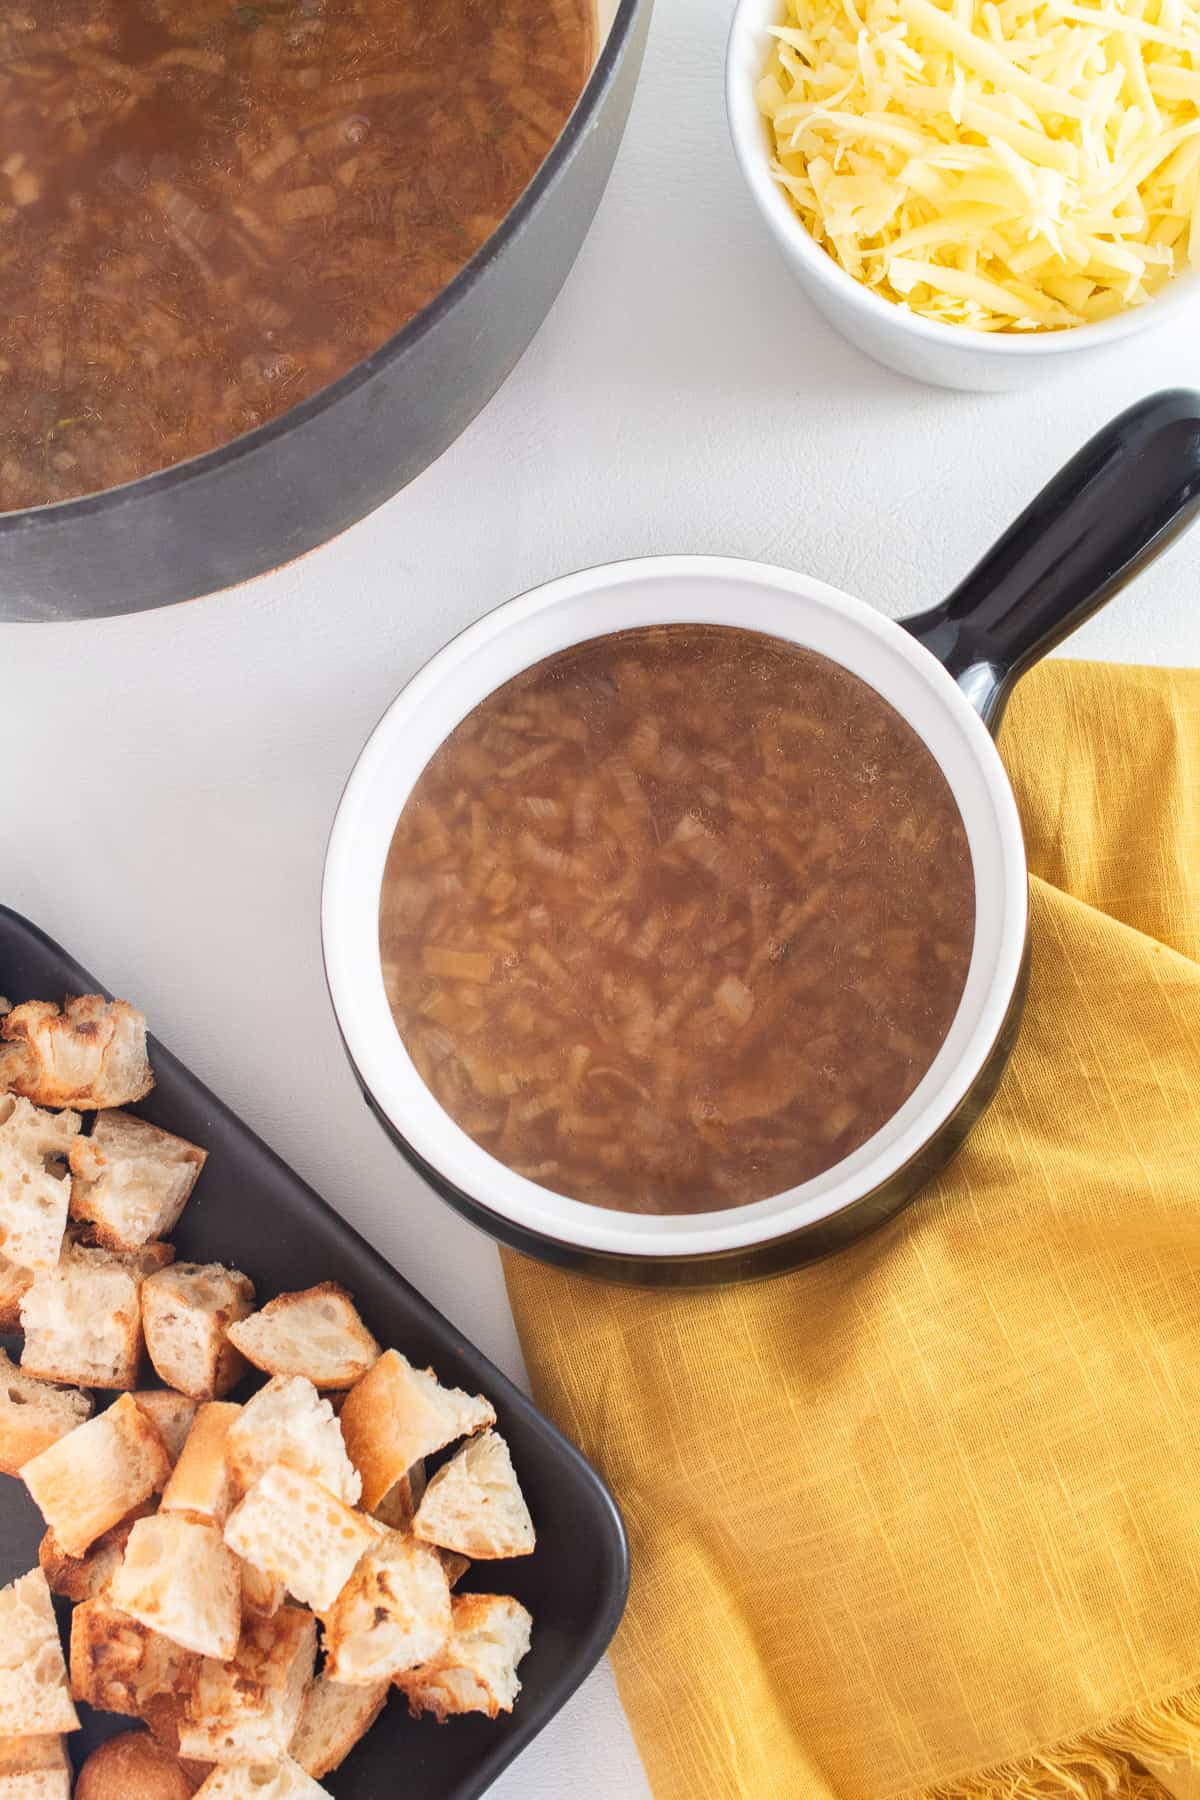 A serving of soup in a handled bowl with croutons and shredded cheese in containers nearby.